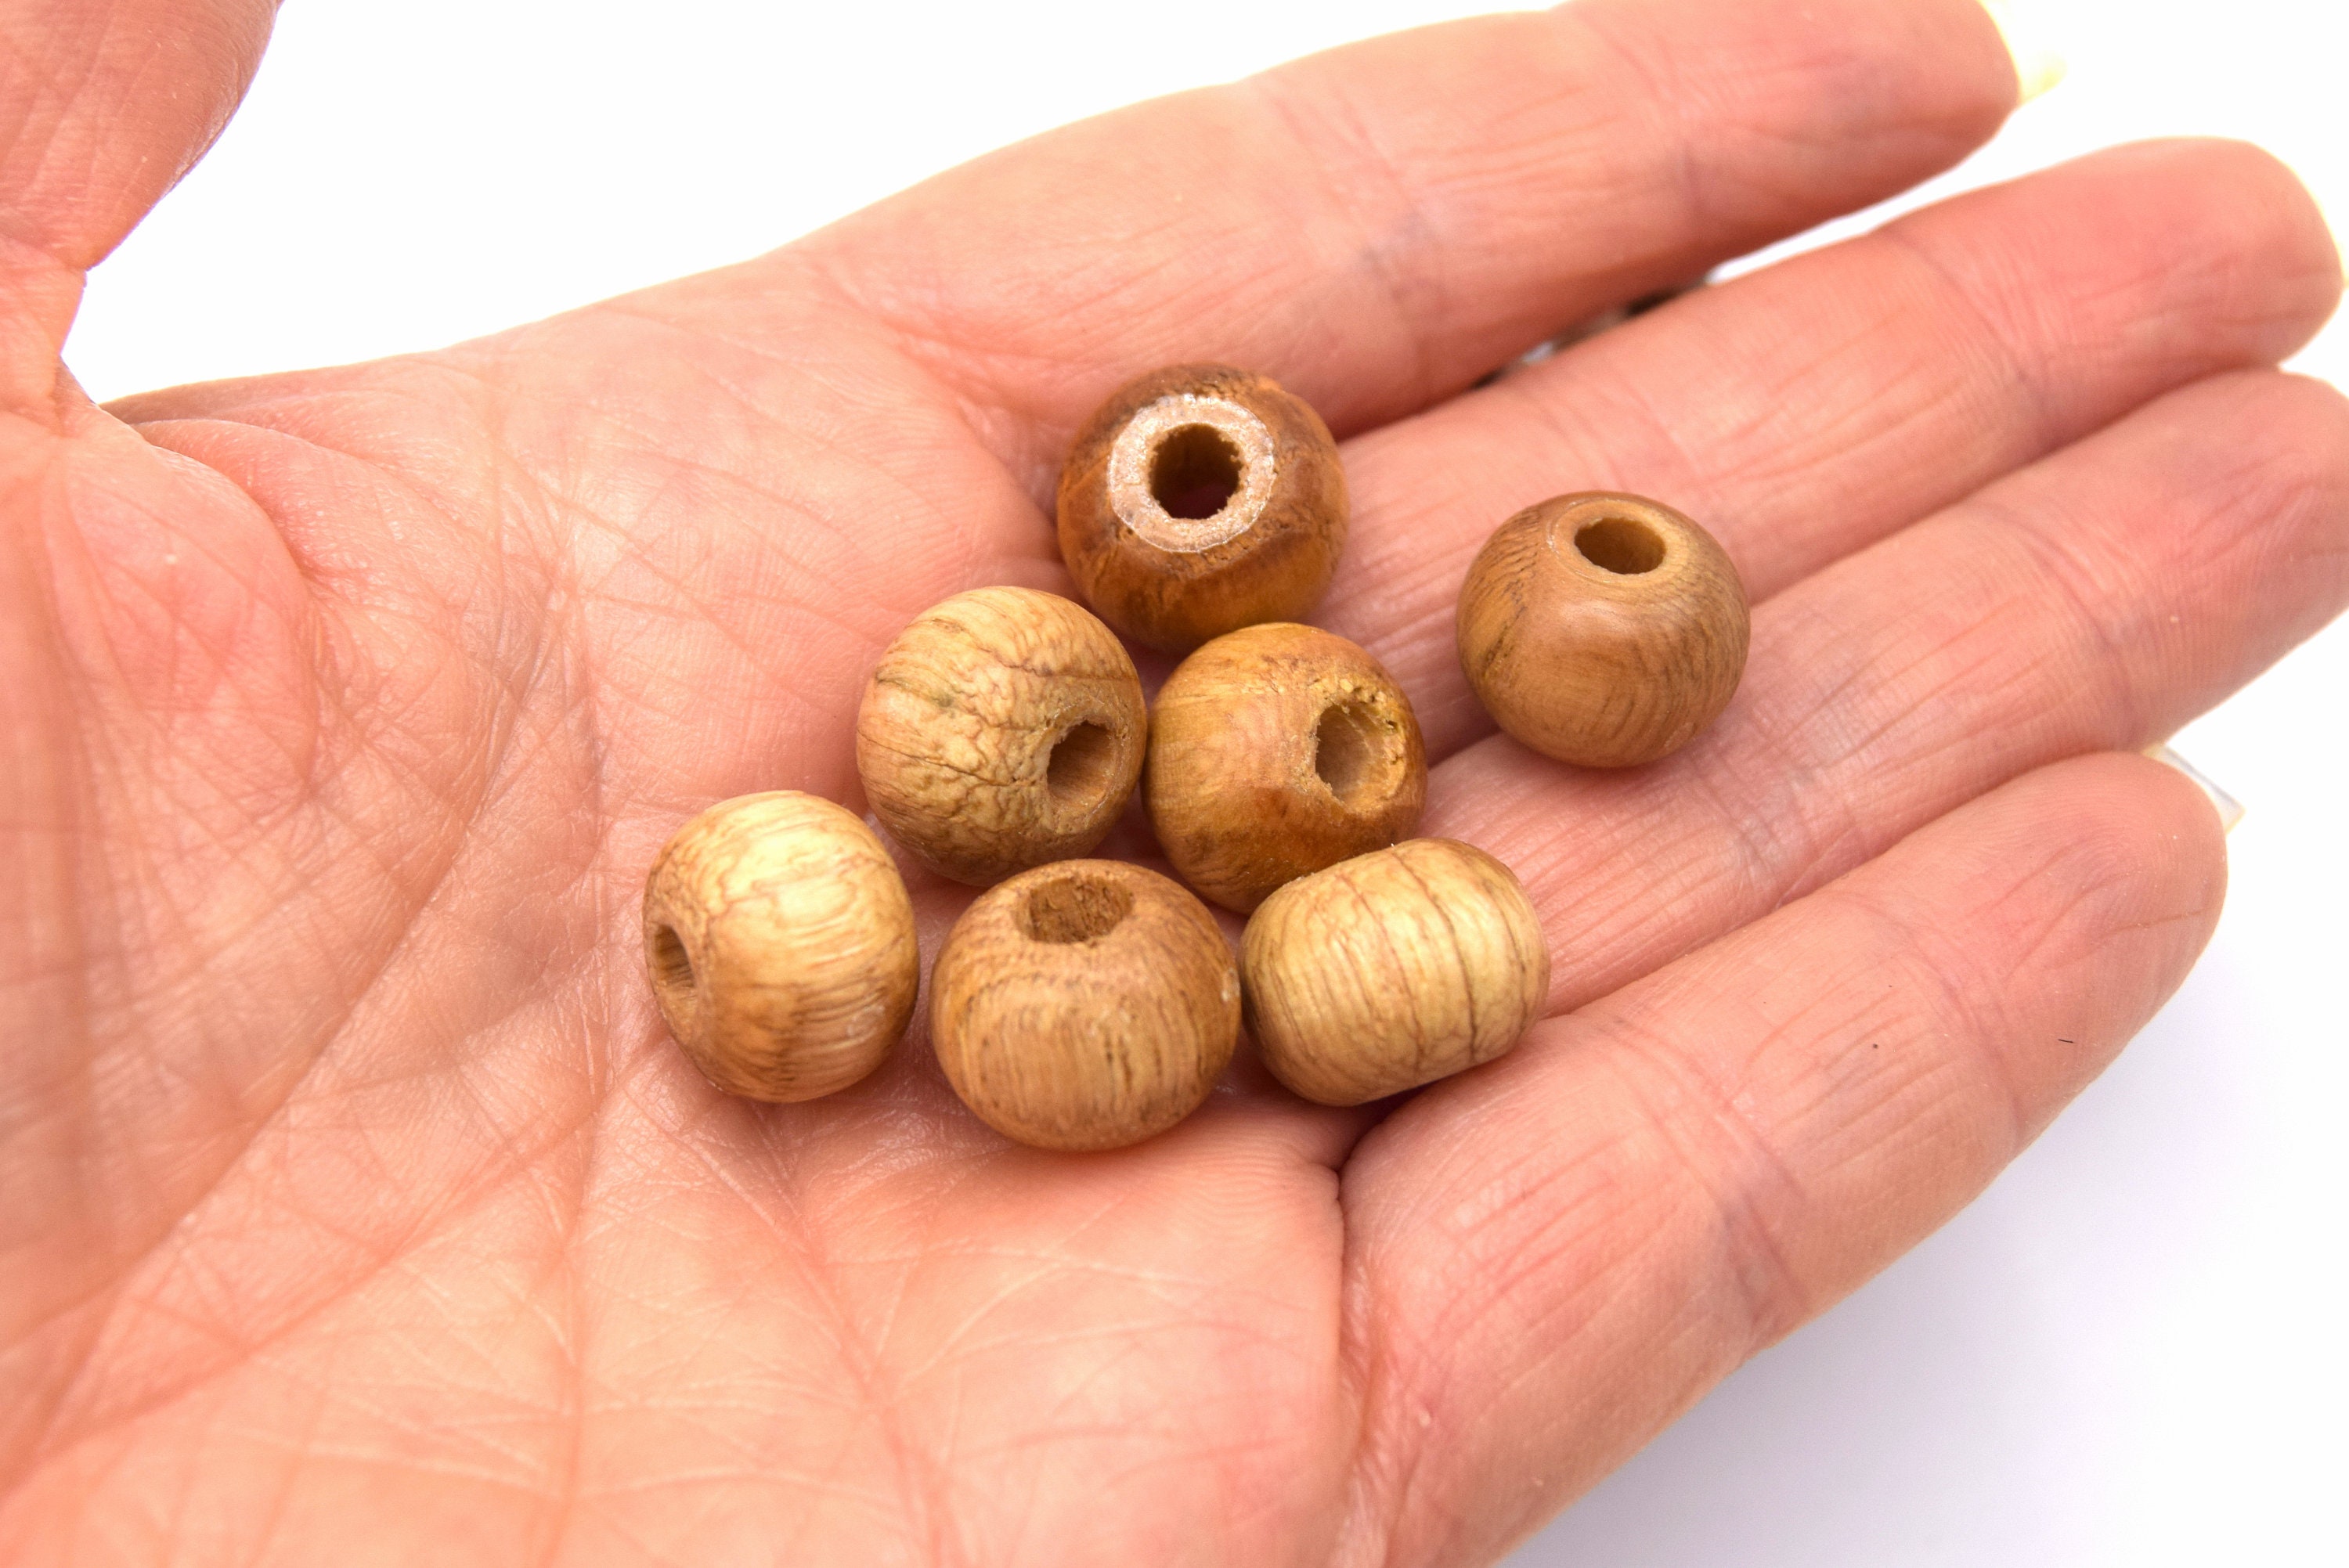 Oak wood beads 22 mm (0.86 inches) Natural wooden beads 10 pcs